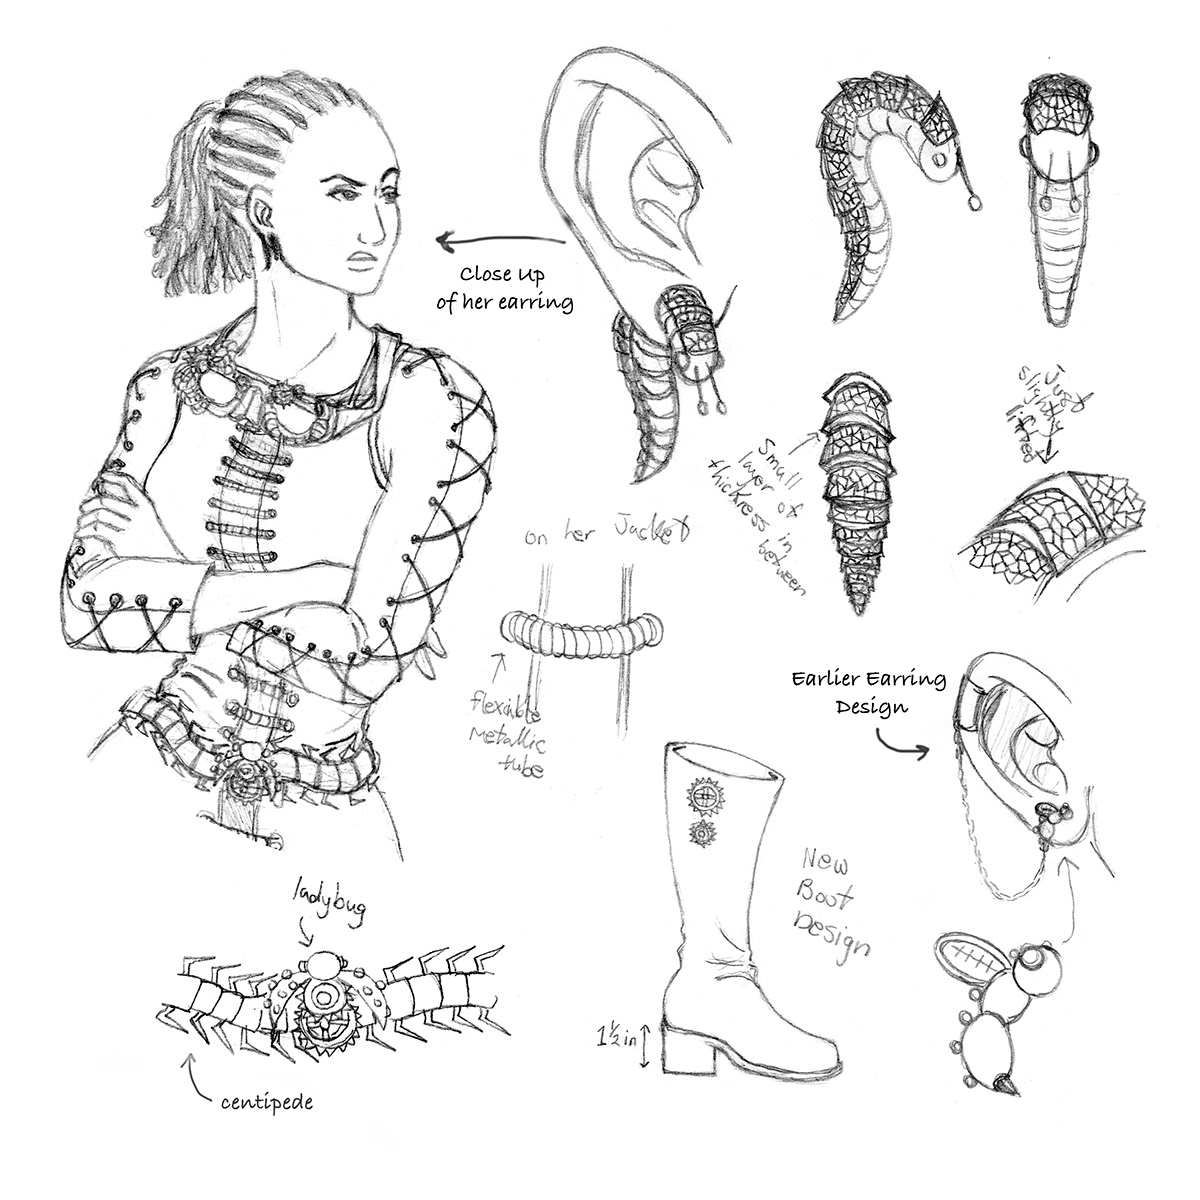 Layout characters detail clothing design heroine gears STEAMPUNK leather boots earrings Insects golden insects Patterns shop keeper